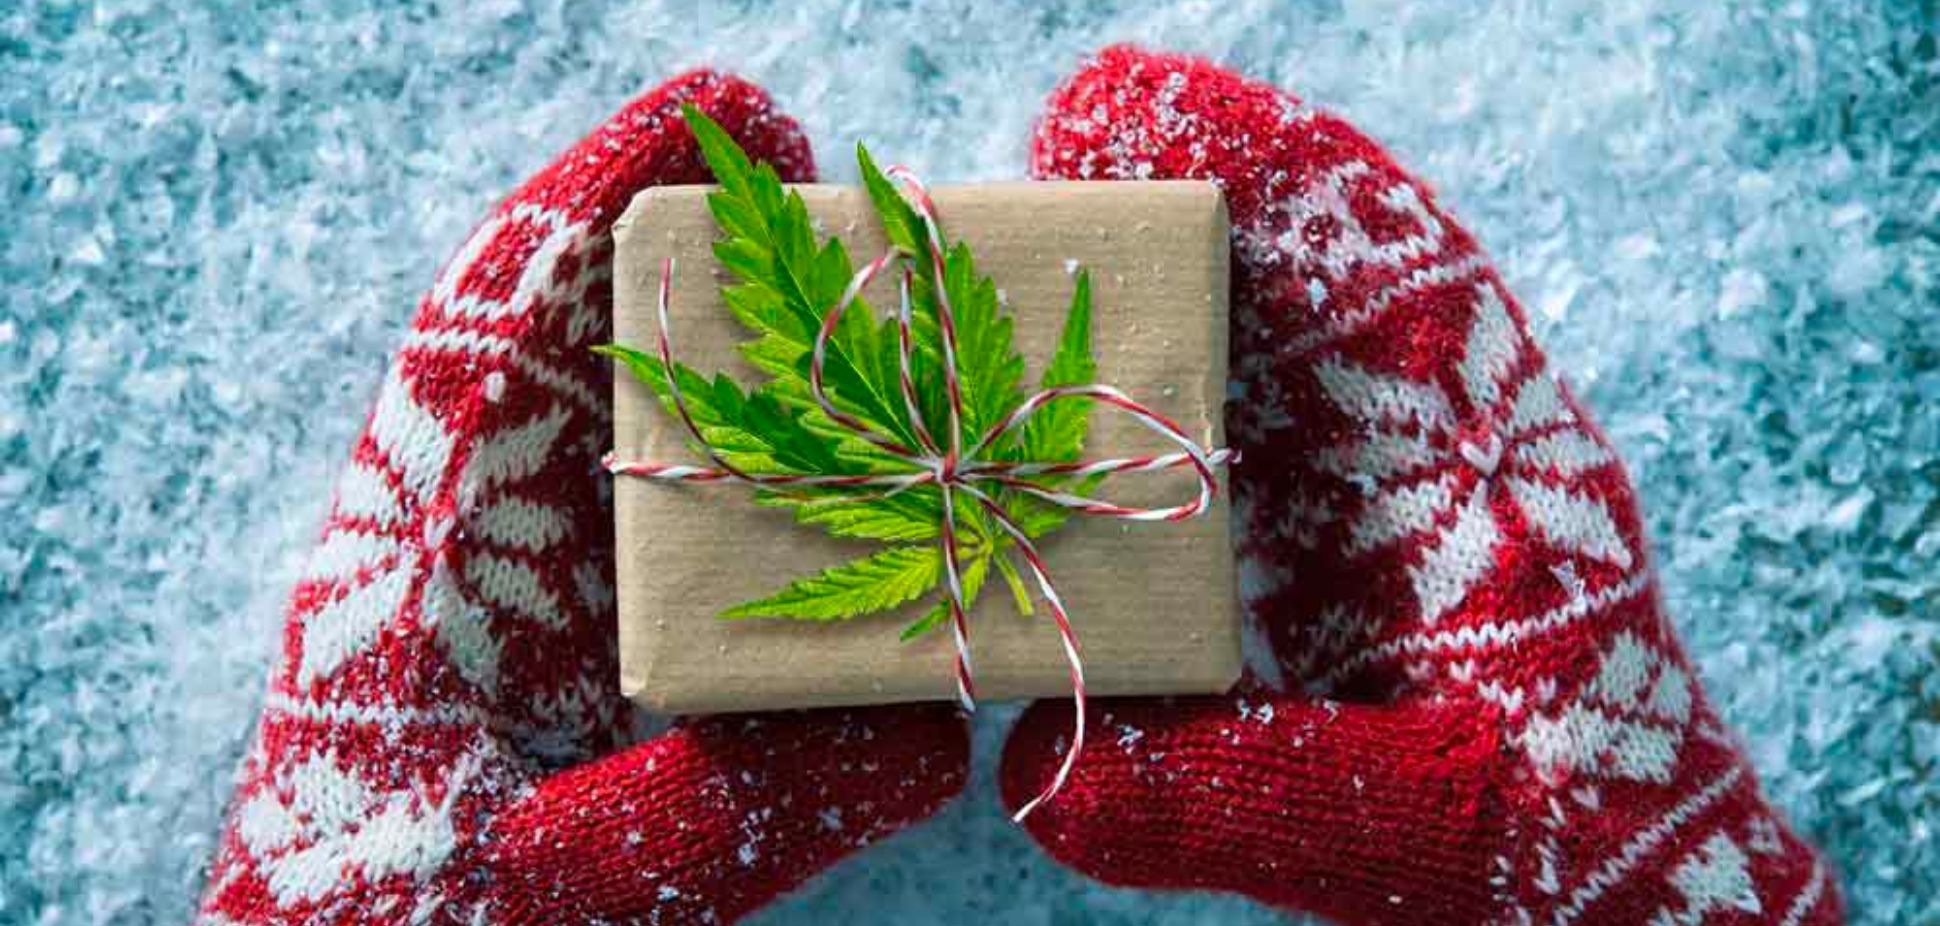 A Cannabis User’s Guide to the Holiday Season